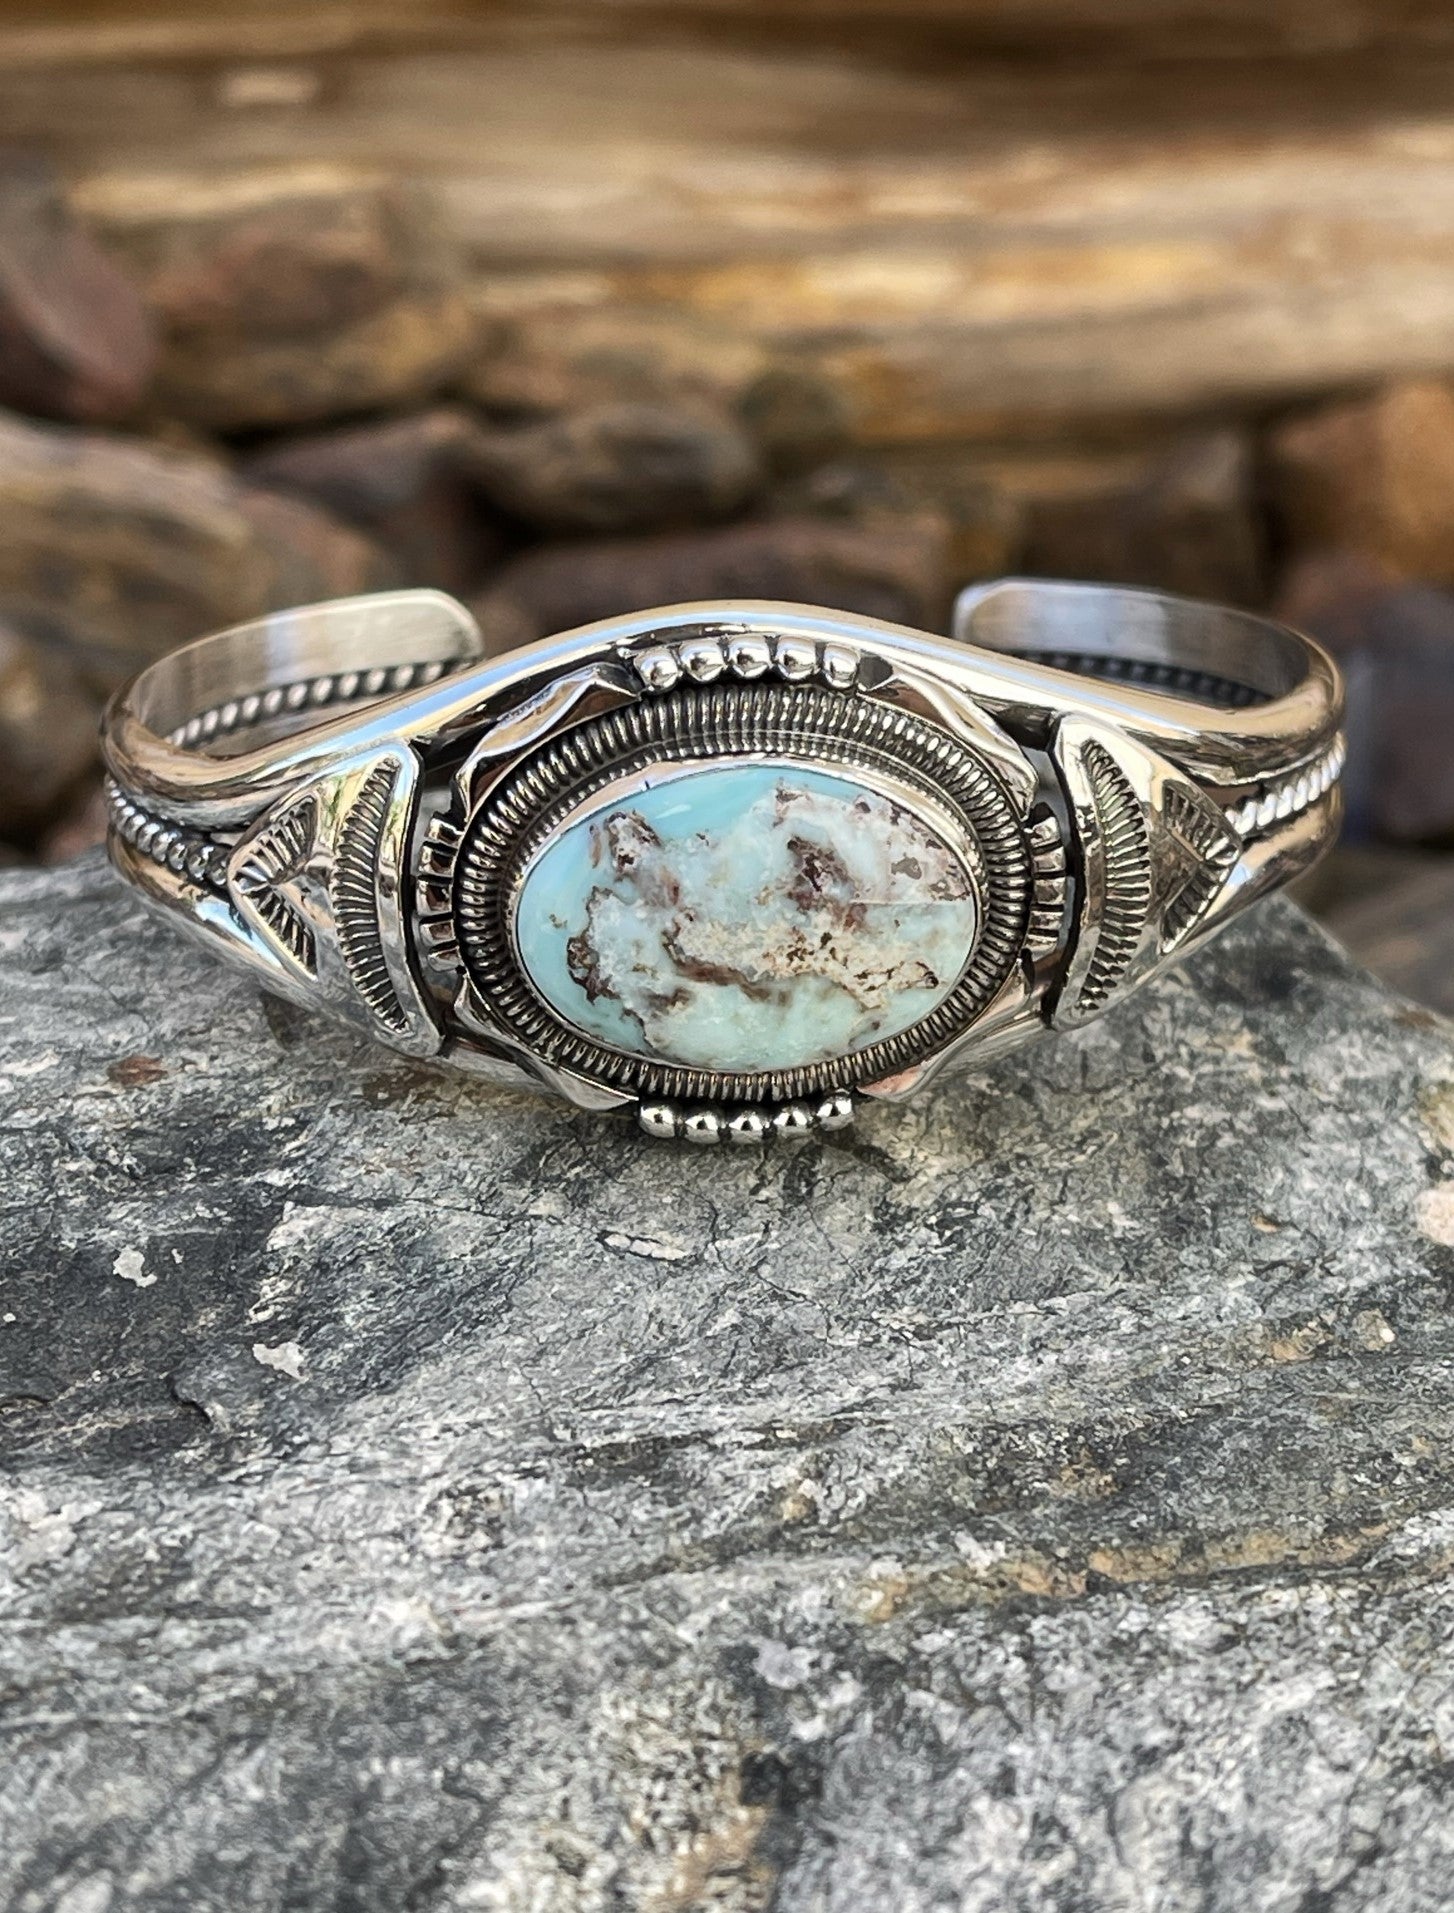 Hand Crafted Solid Sterling Silver Dry Creek Turquoise bracelet with Coil Detail